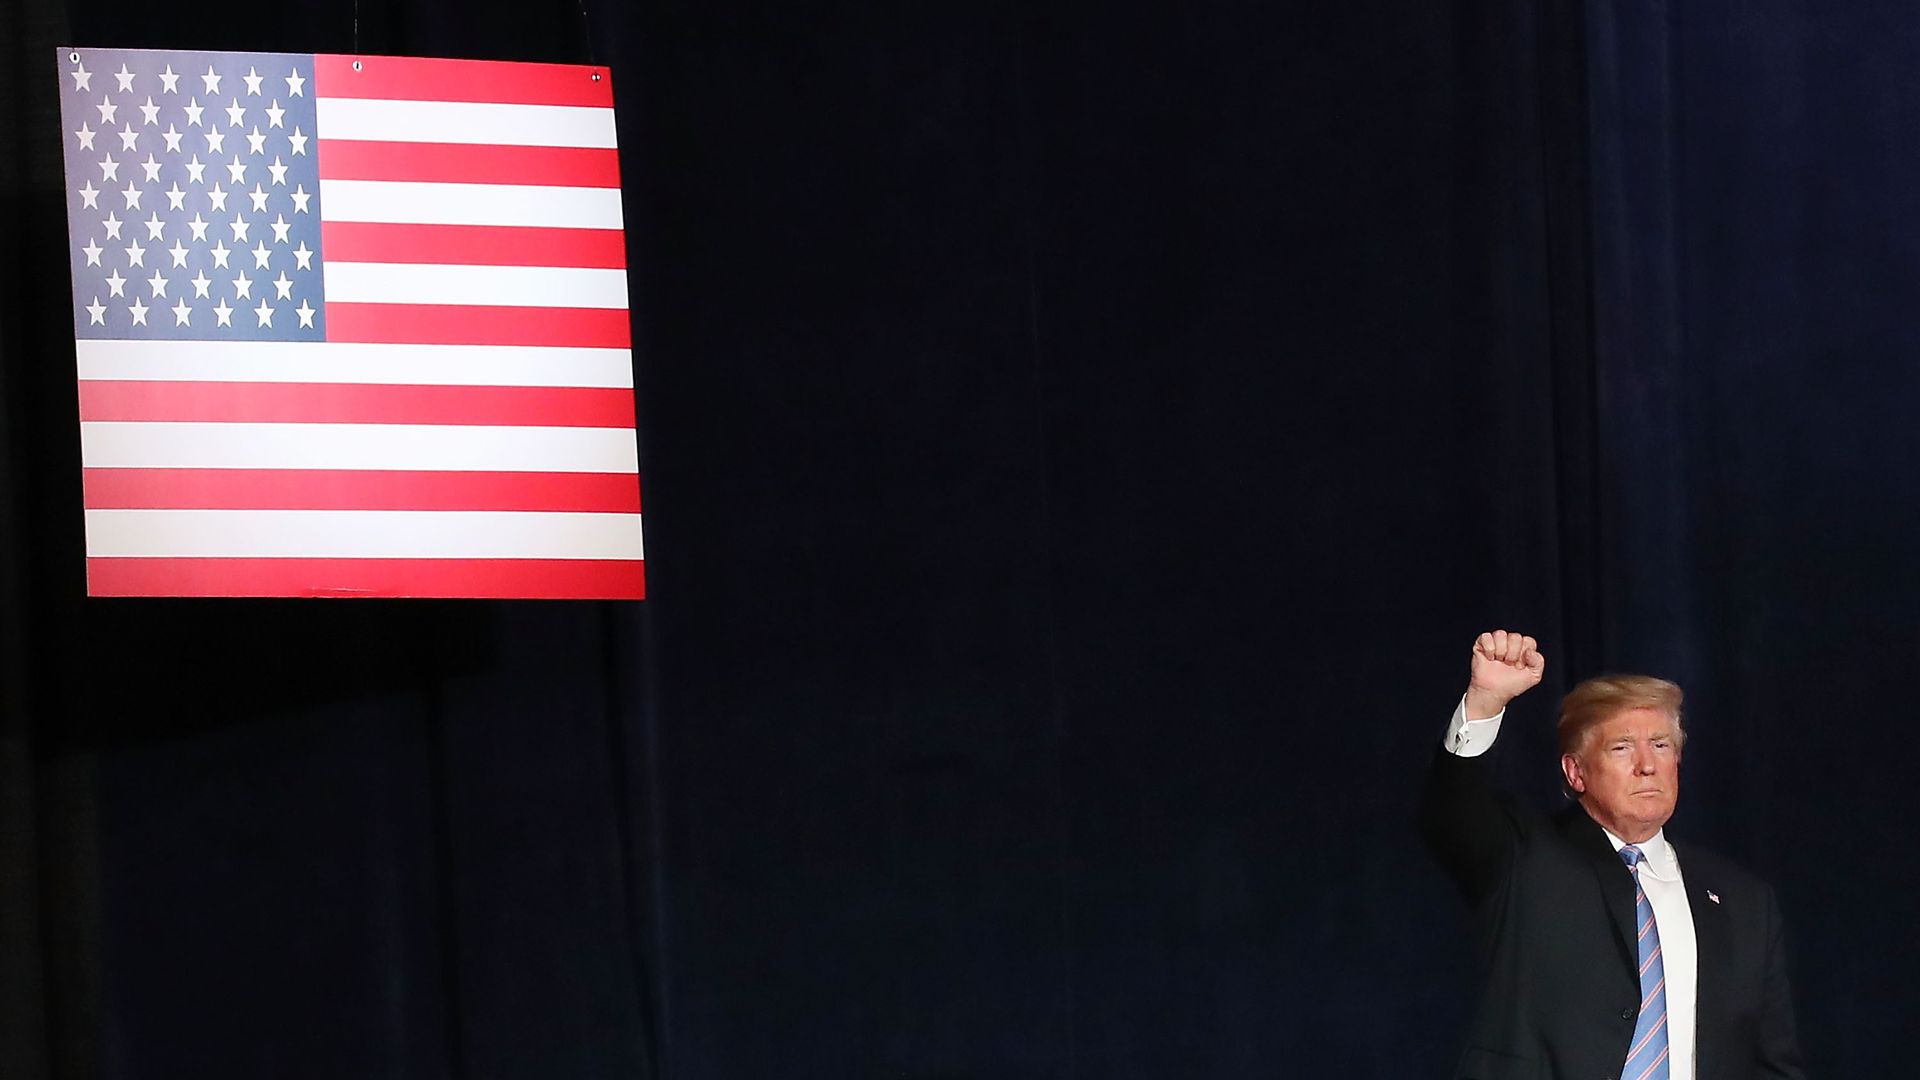 Donald Trump raises his arm in a fist before a navy blue background and an American flag.